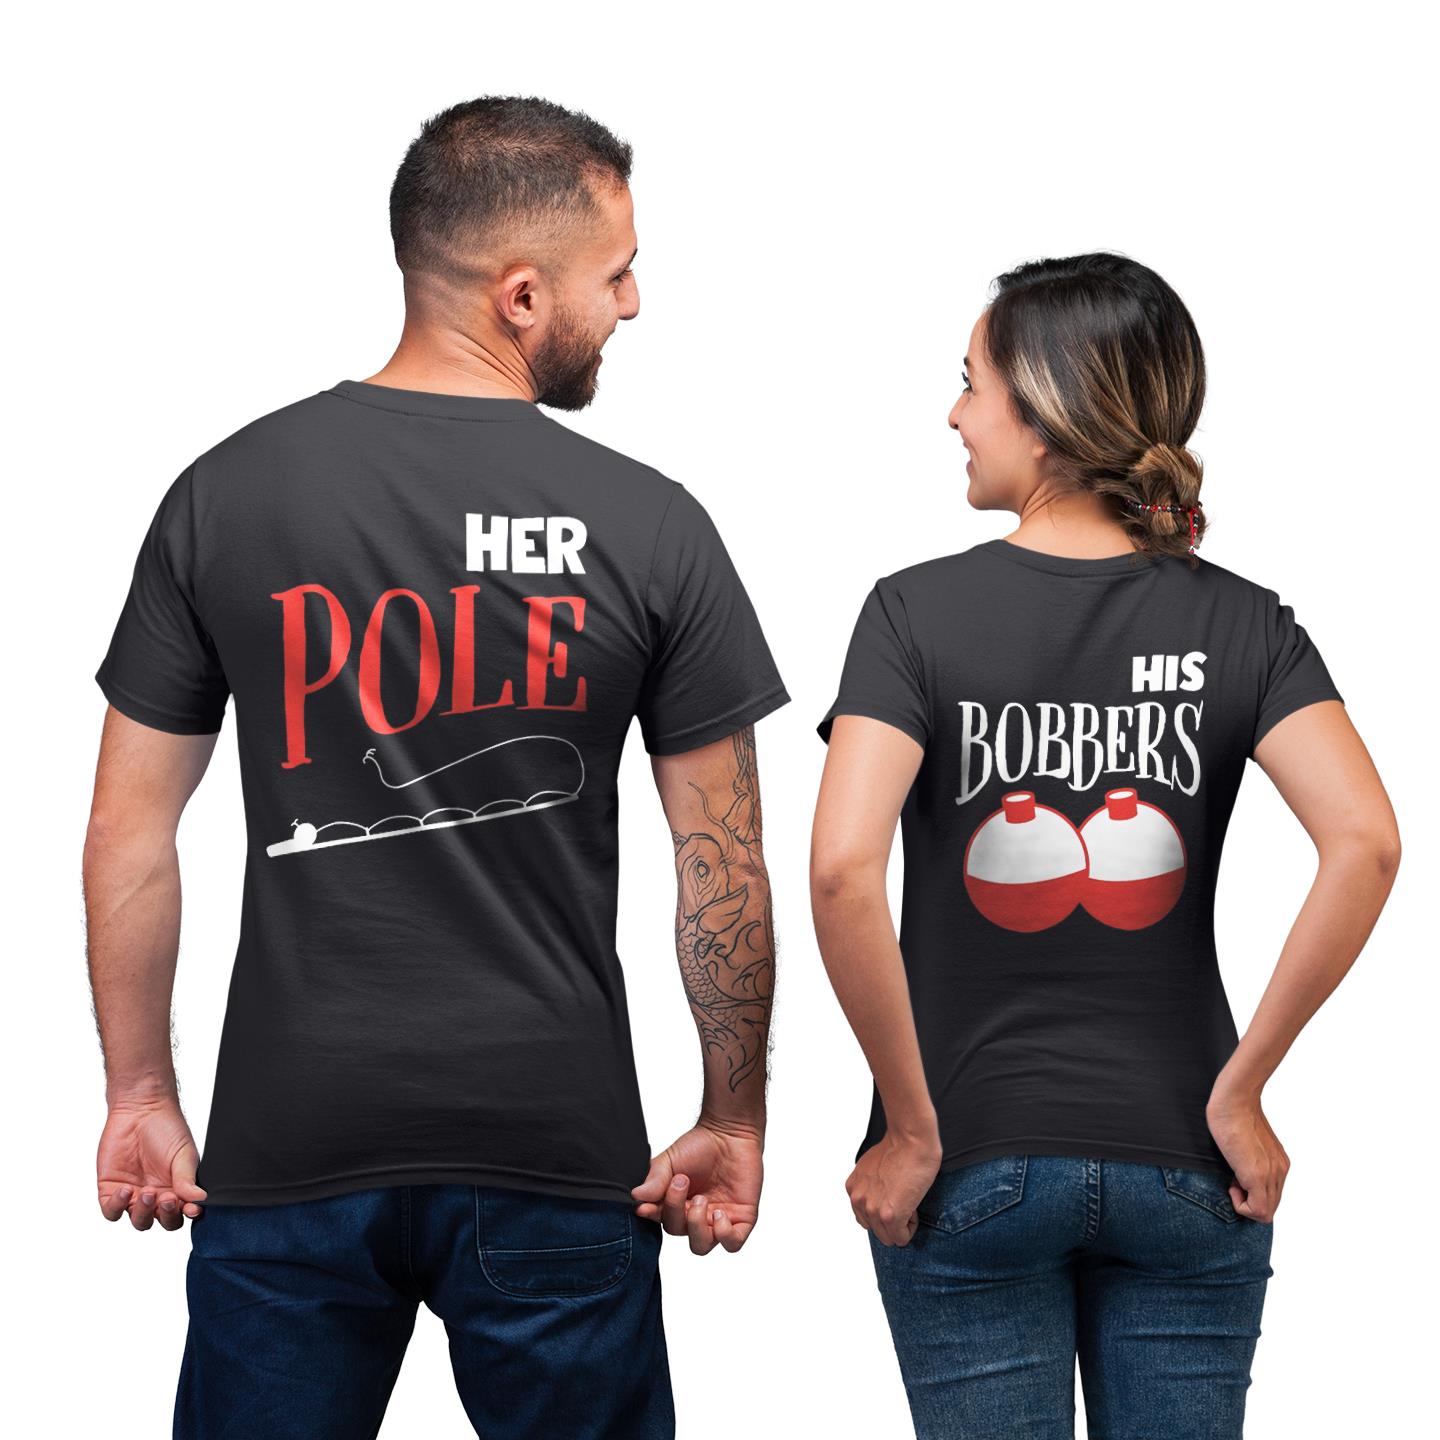 Funny Matching For Lover Couple His Boobers Her Pole Gift T- Shirt